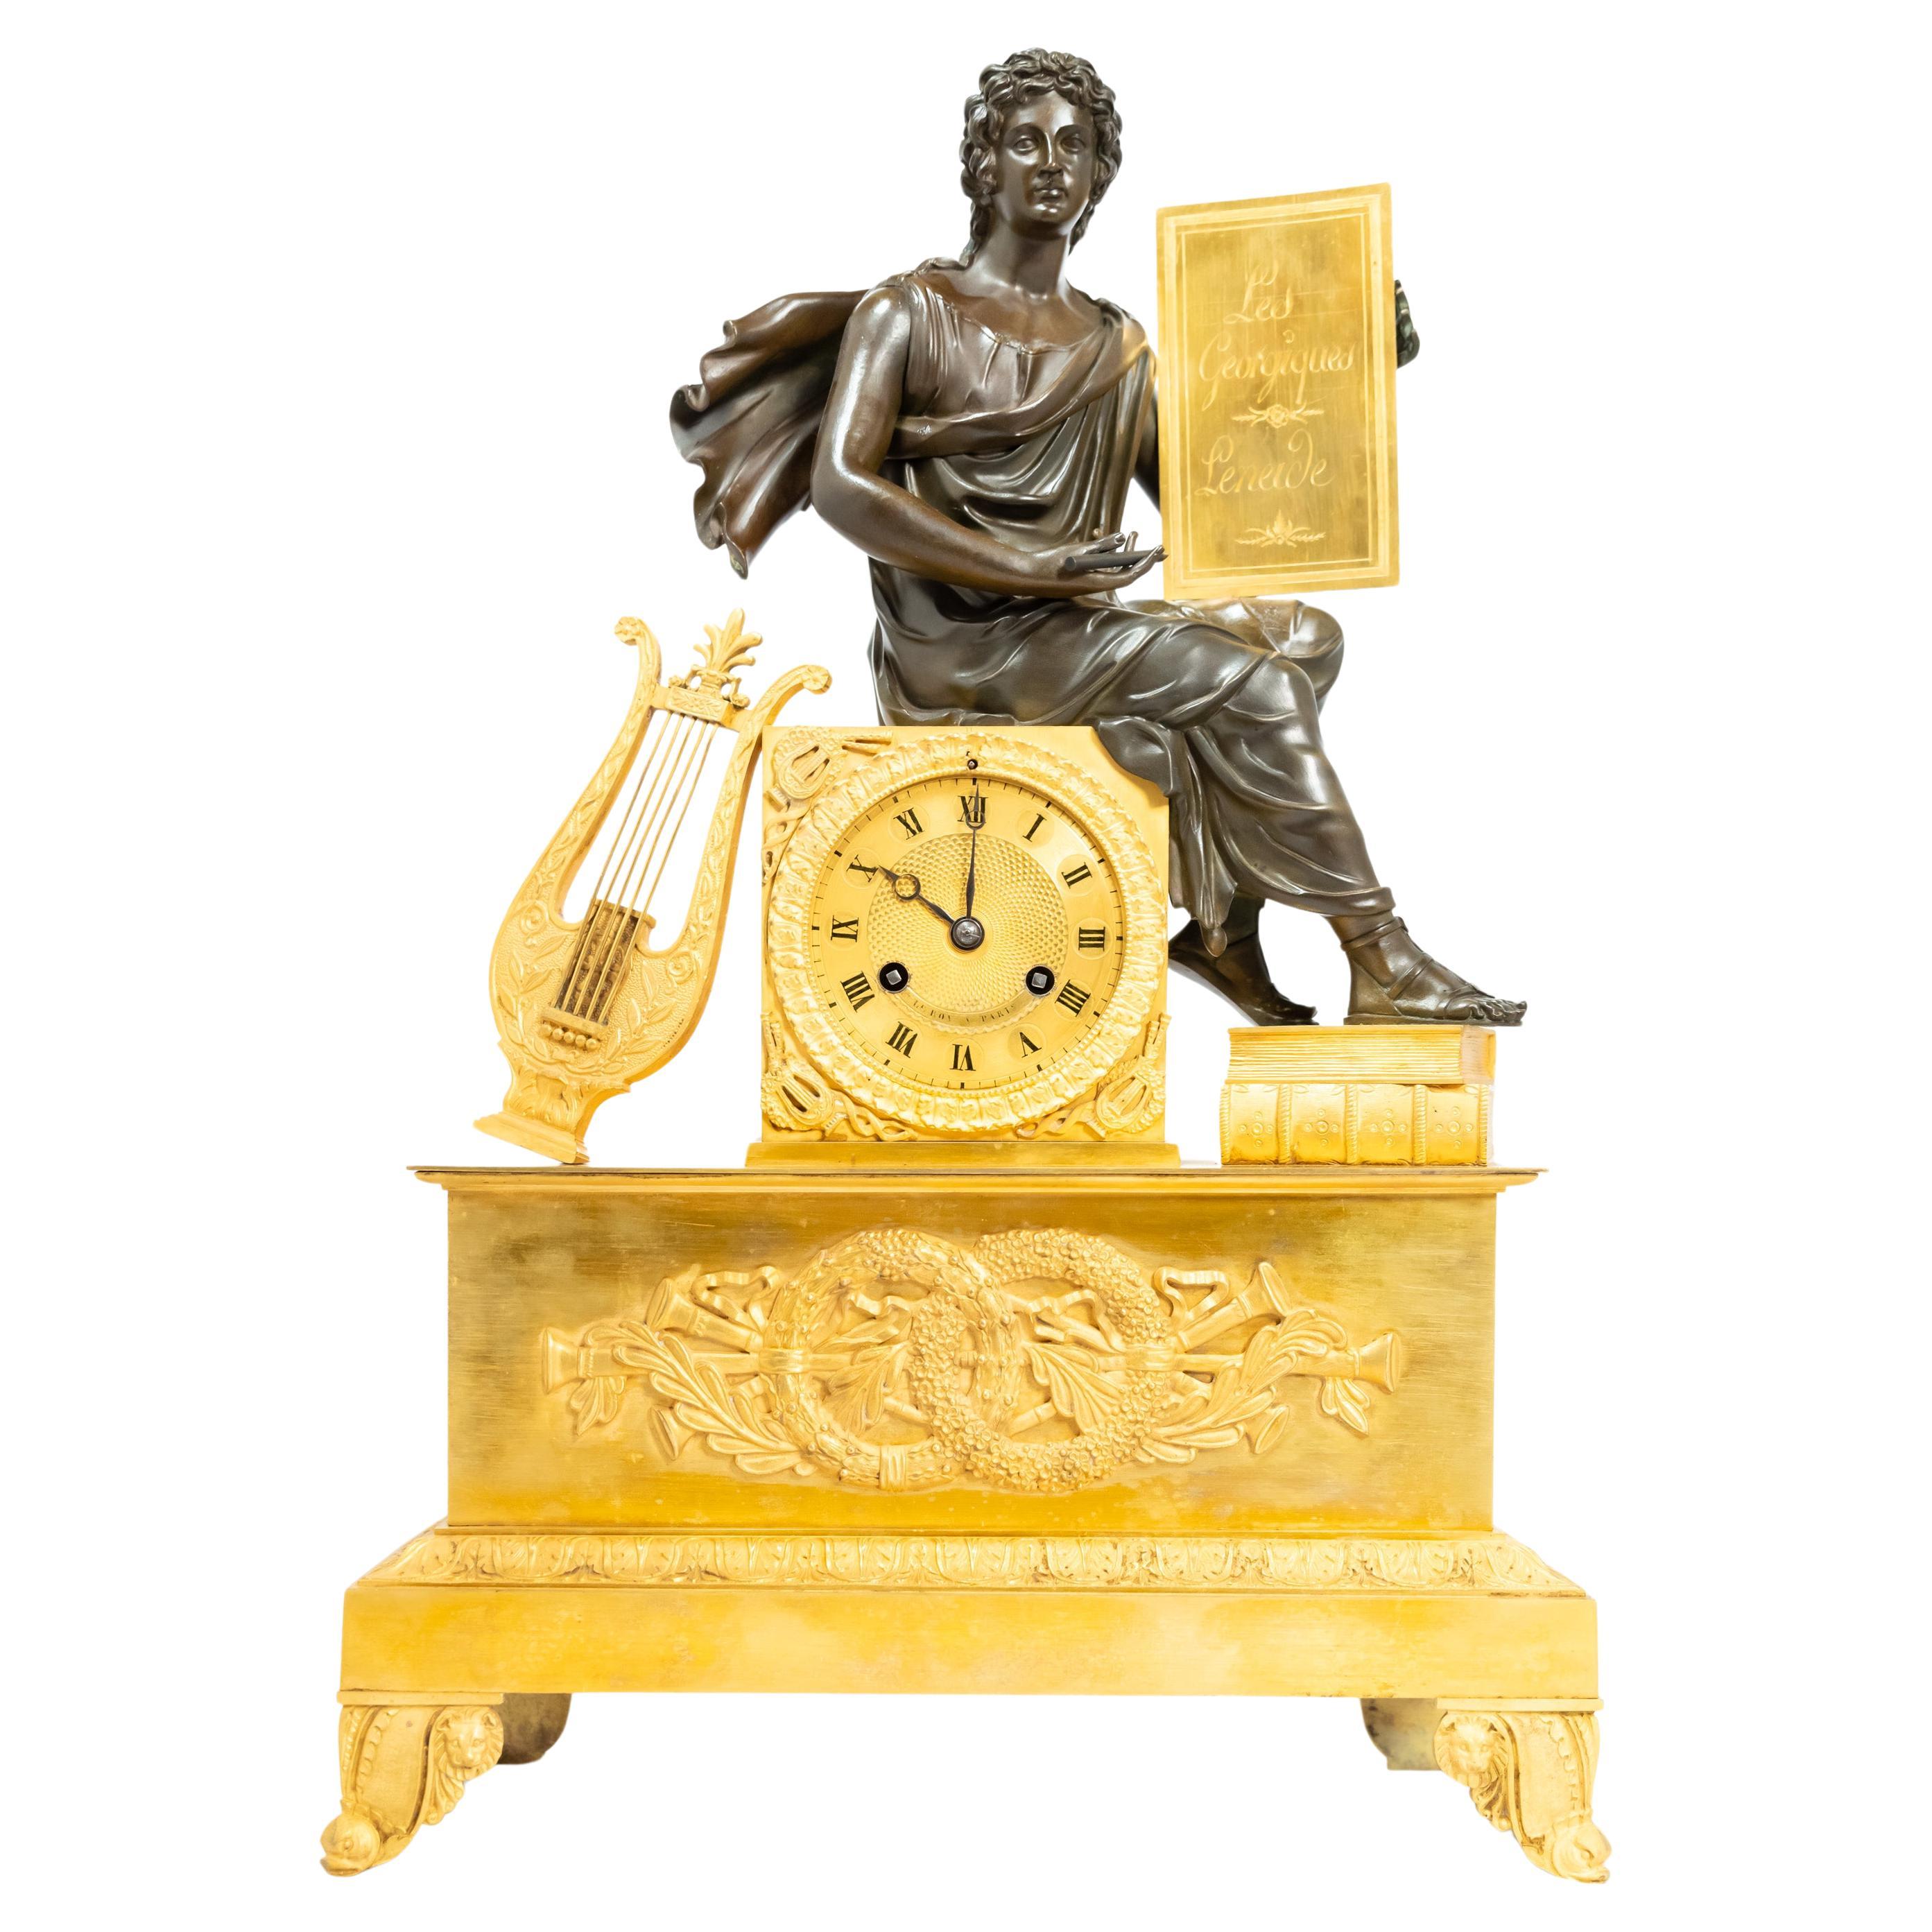 A Restauration Patina and Fire-Gilt Clock Depicting Virgil For Sale